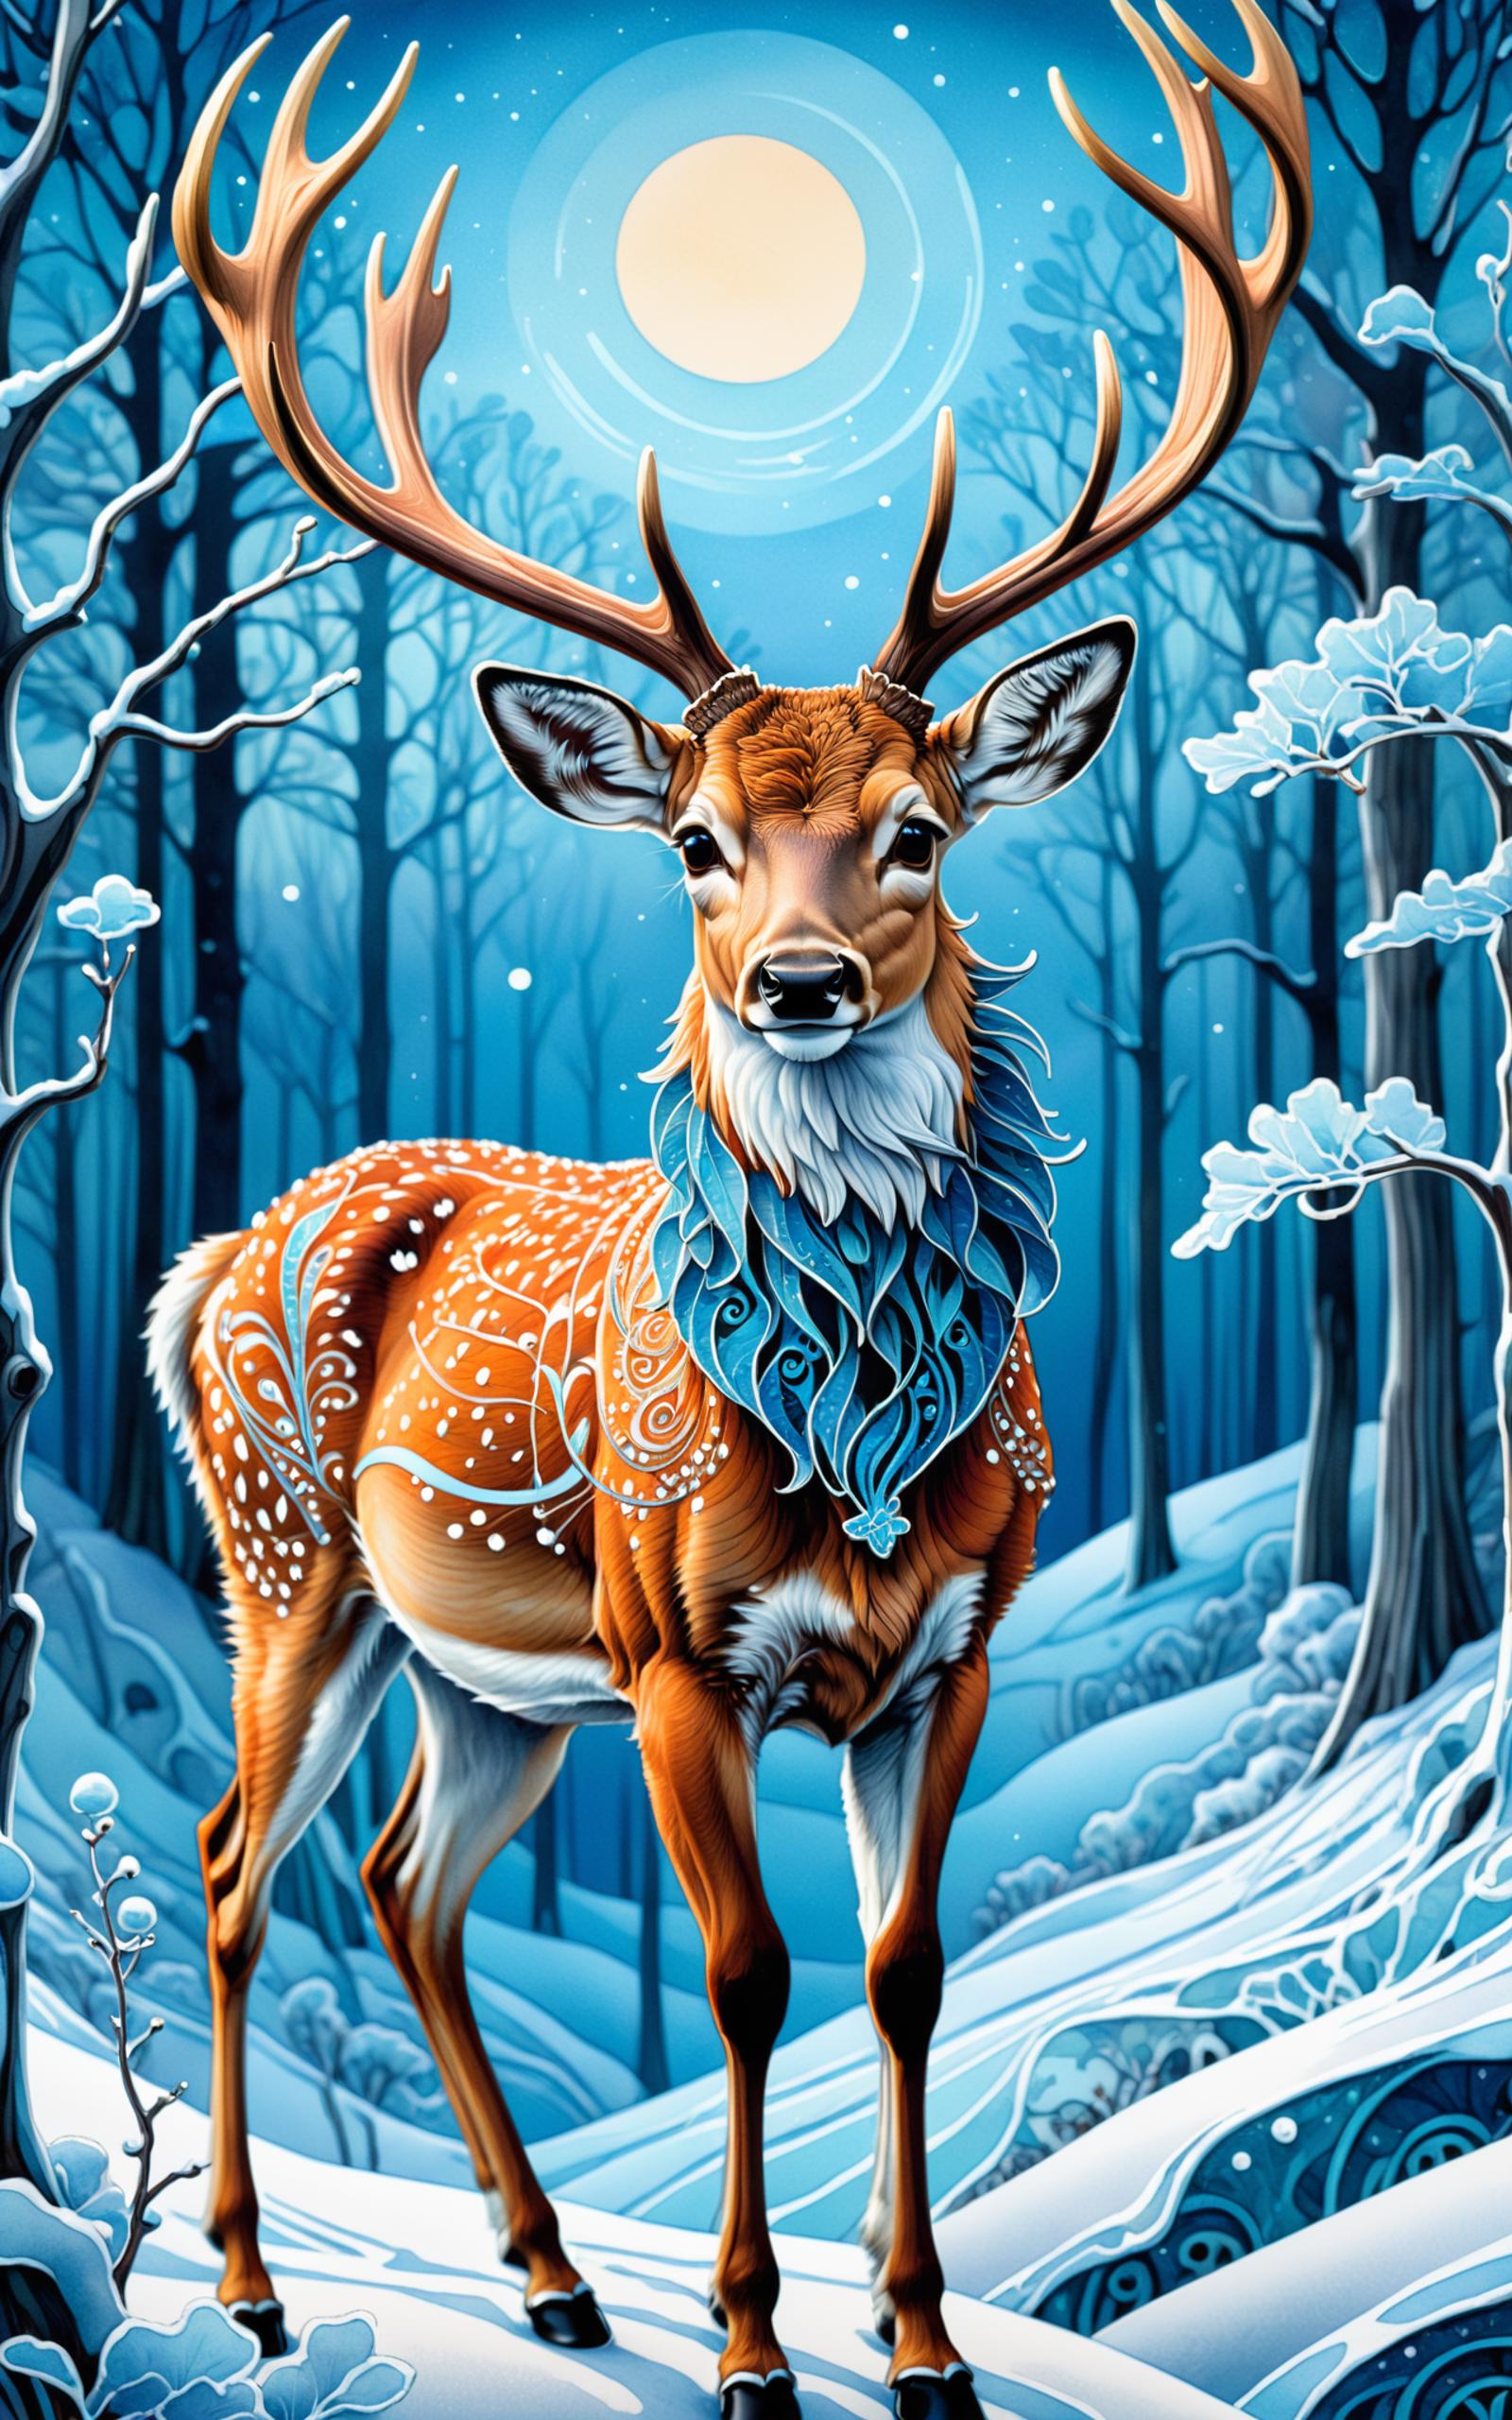 A deer with a blue necklace stands in a snowy forest.